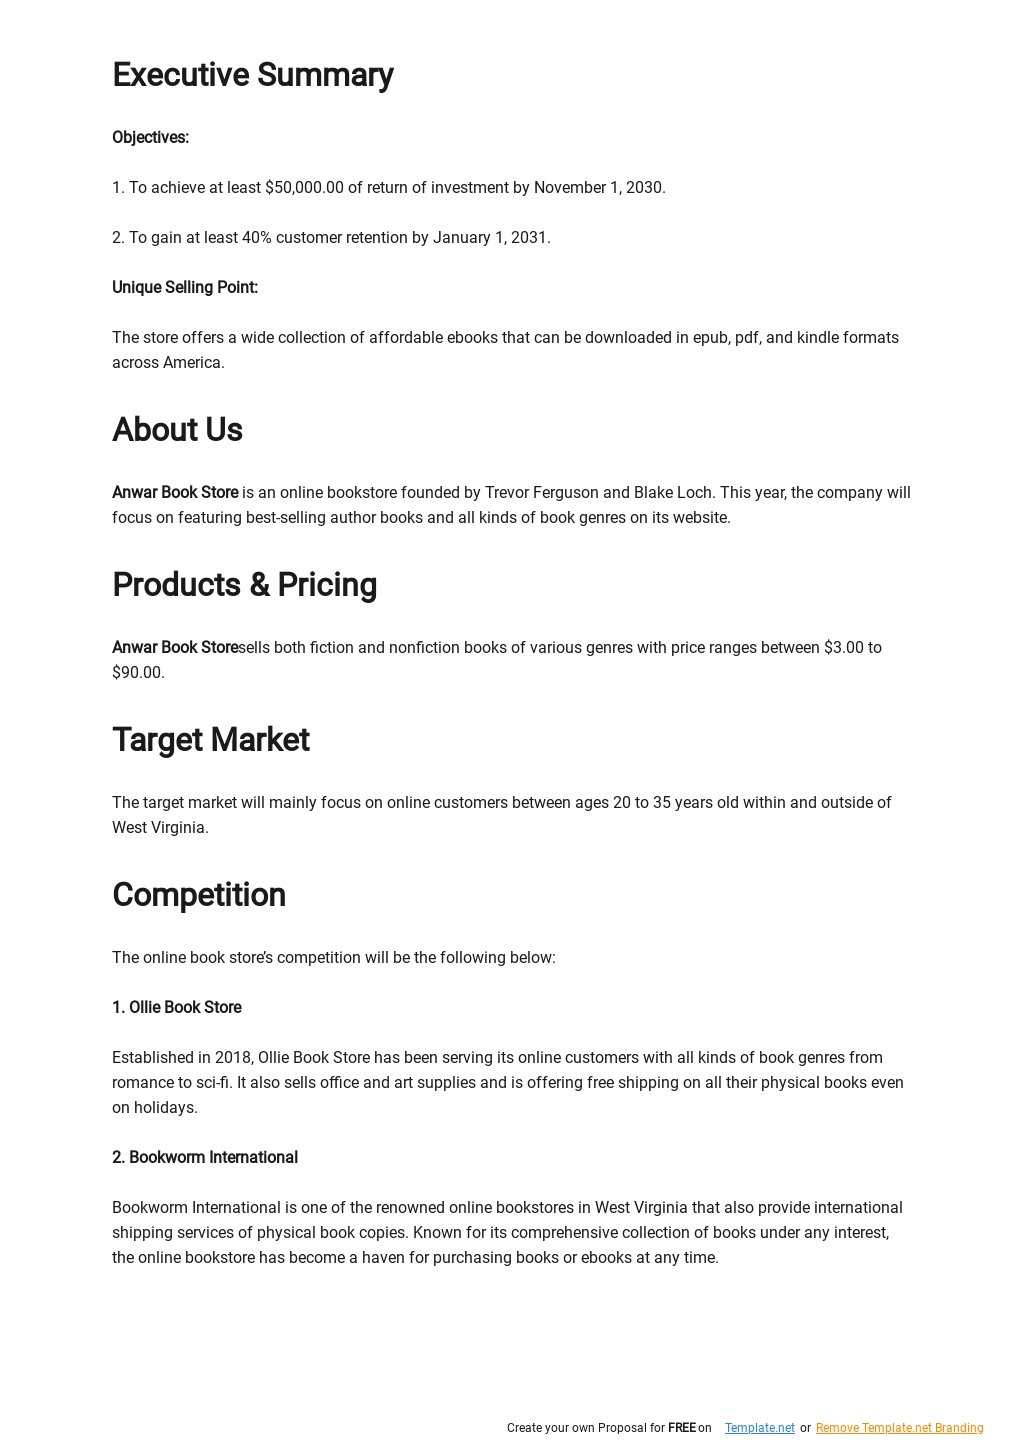 Free Online Book Store Business Plan Template 1.jpe